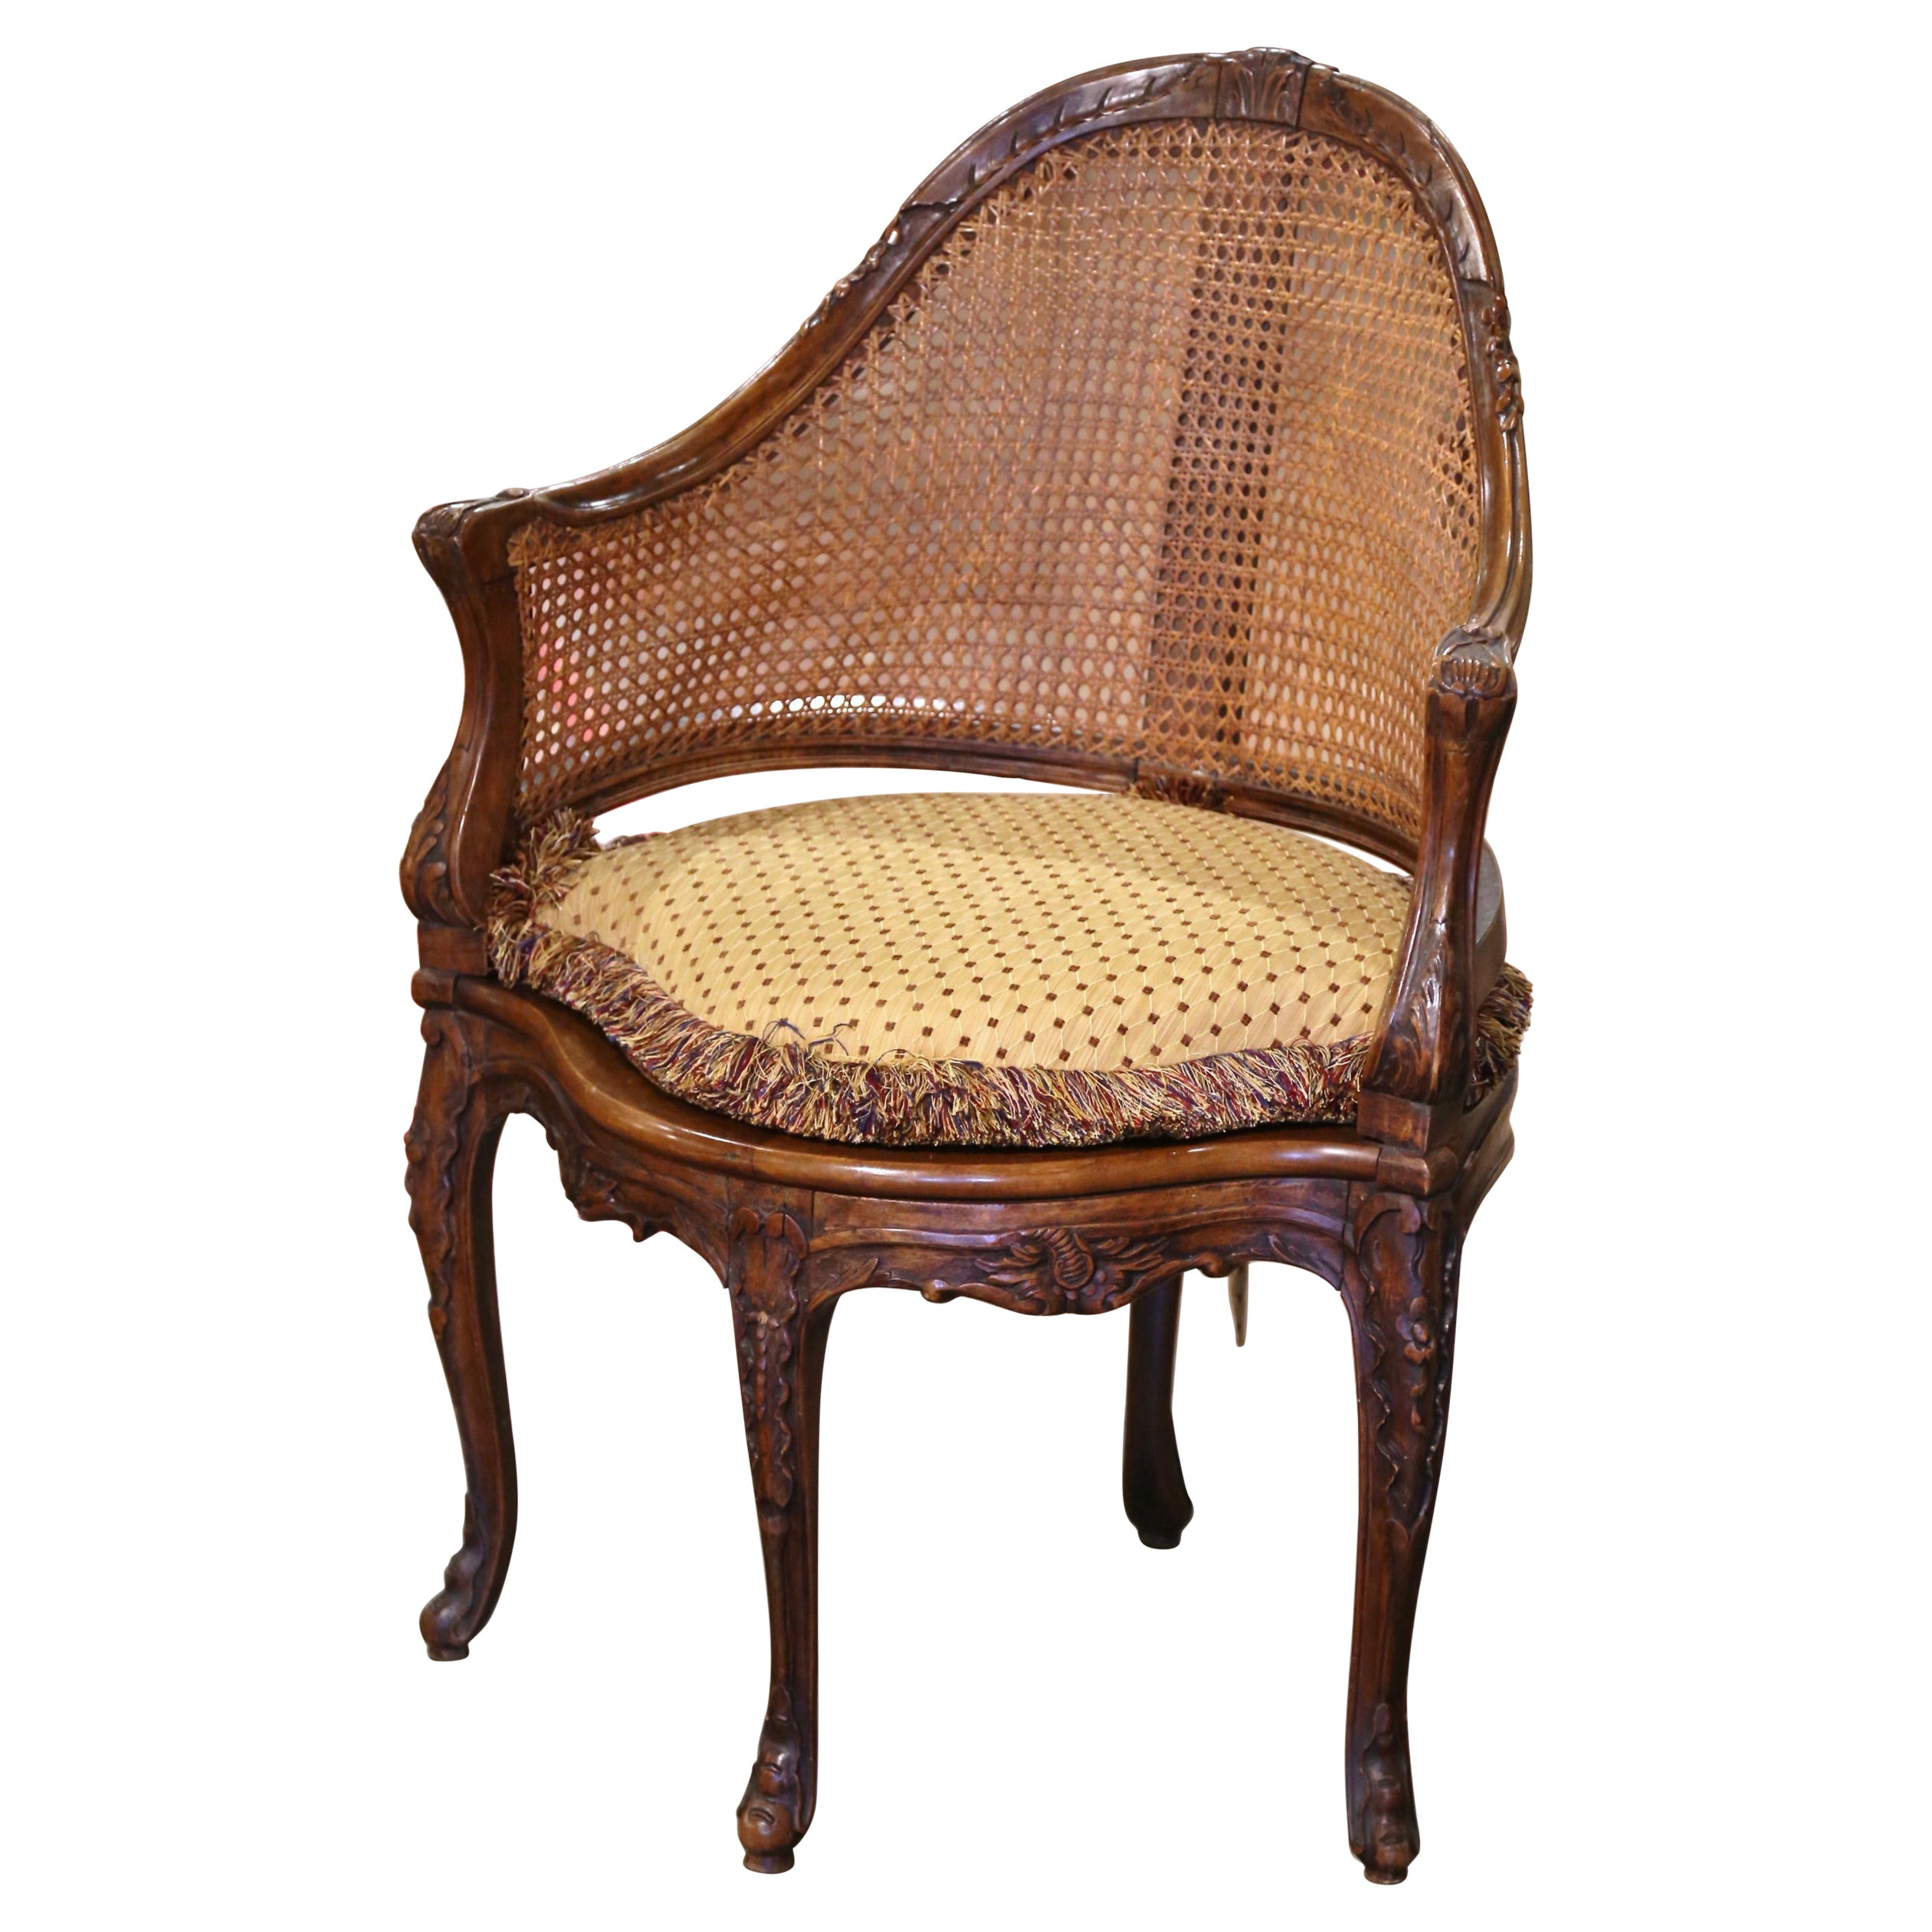 19th Century French Louis XV Carved Walnut and Cane Desk Armchair with Cushion For Sale